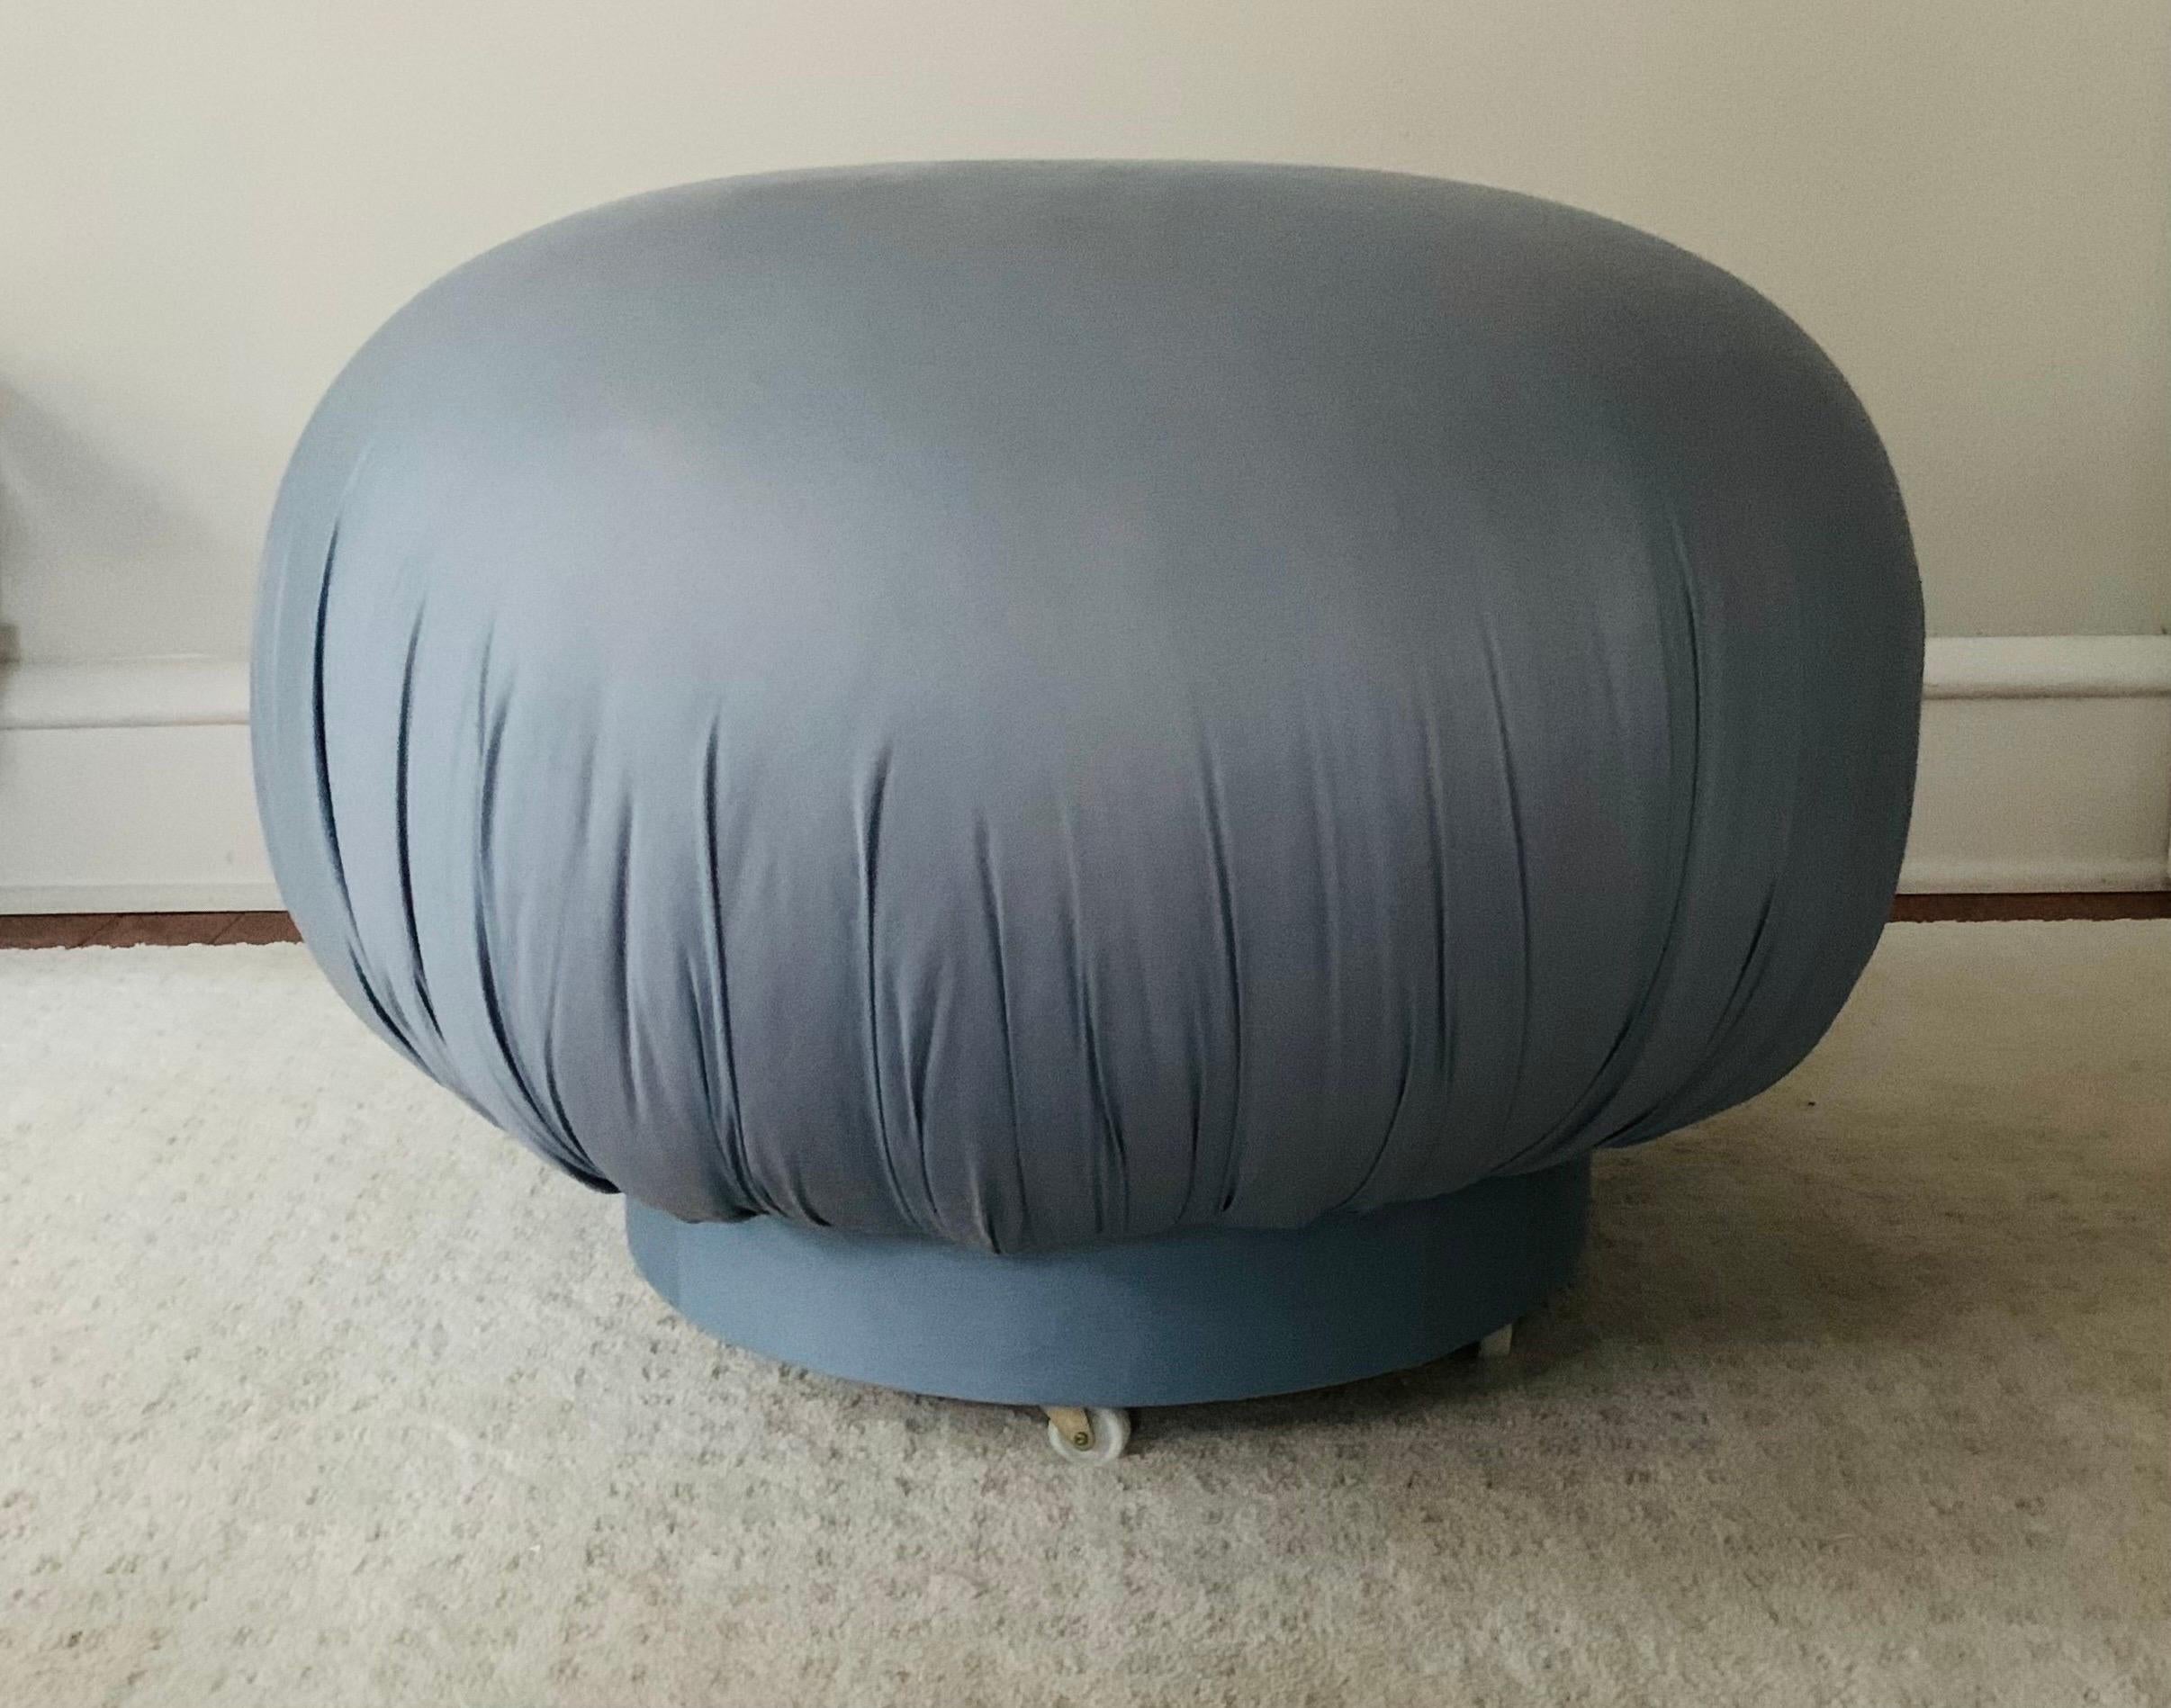 Modern 1990s Postmodern Round Pouf Ottoman Footstool attr. to Kagan for Directional For Sale